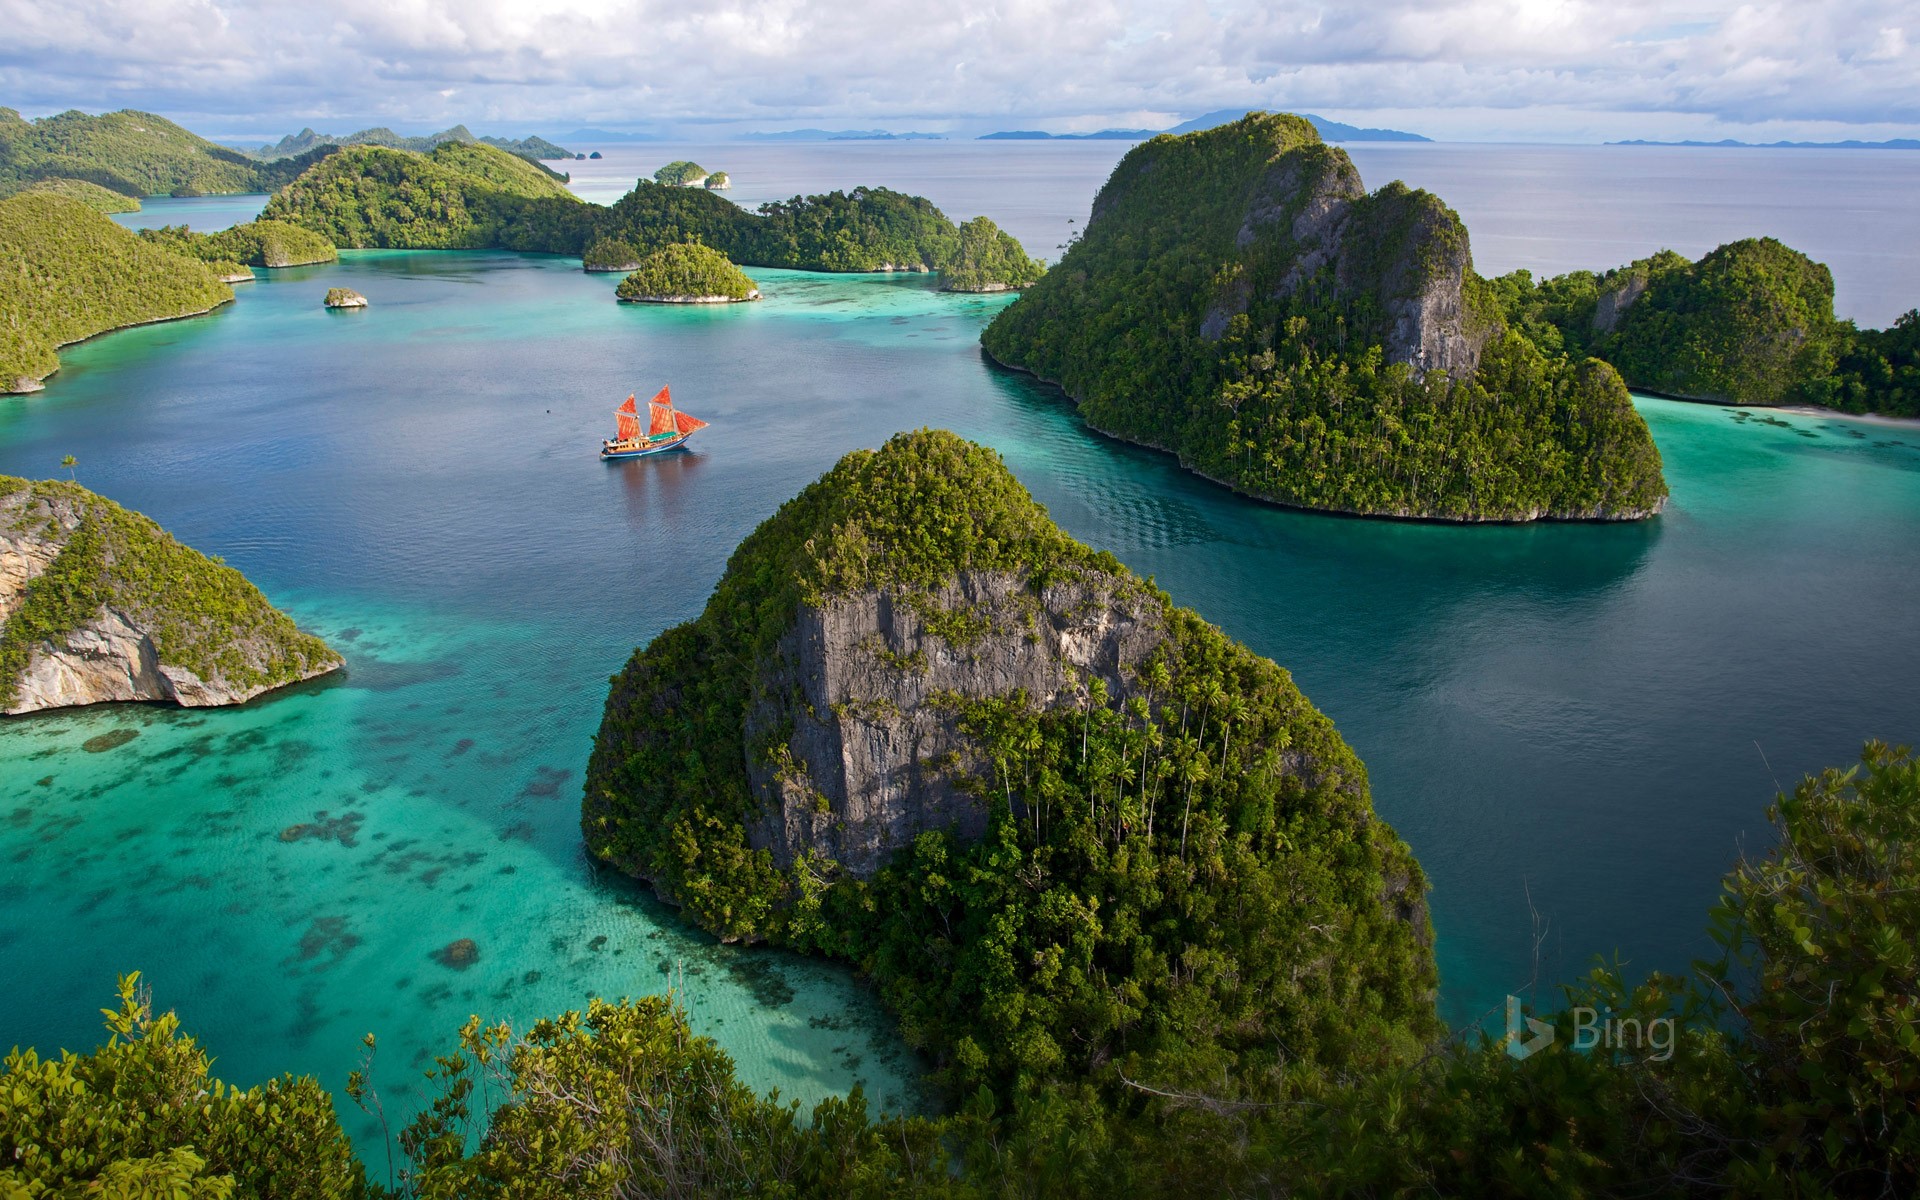 Wayag Island in the Raja Ampat Islands of Indonesia - Image Abyss